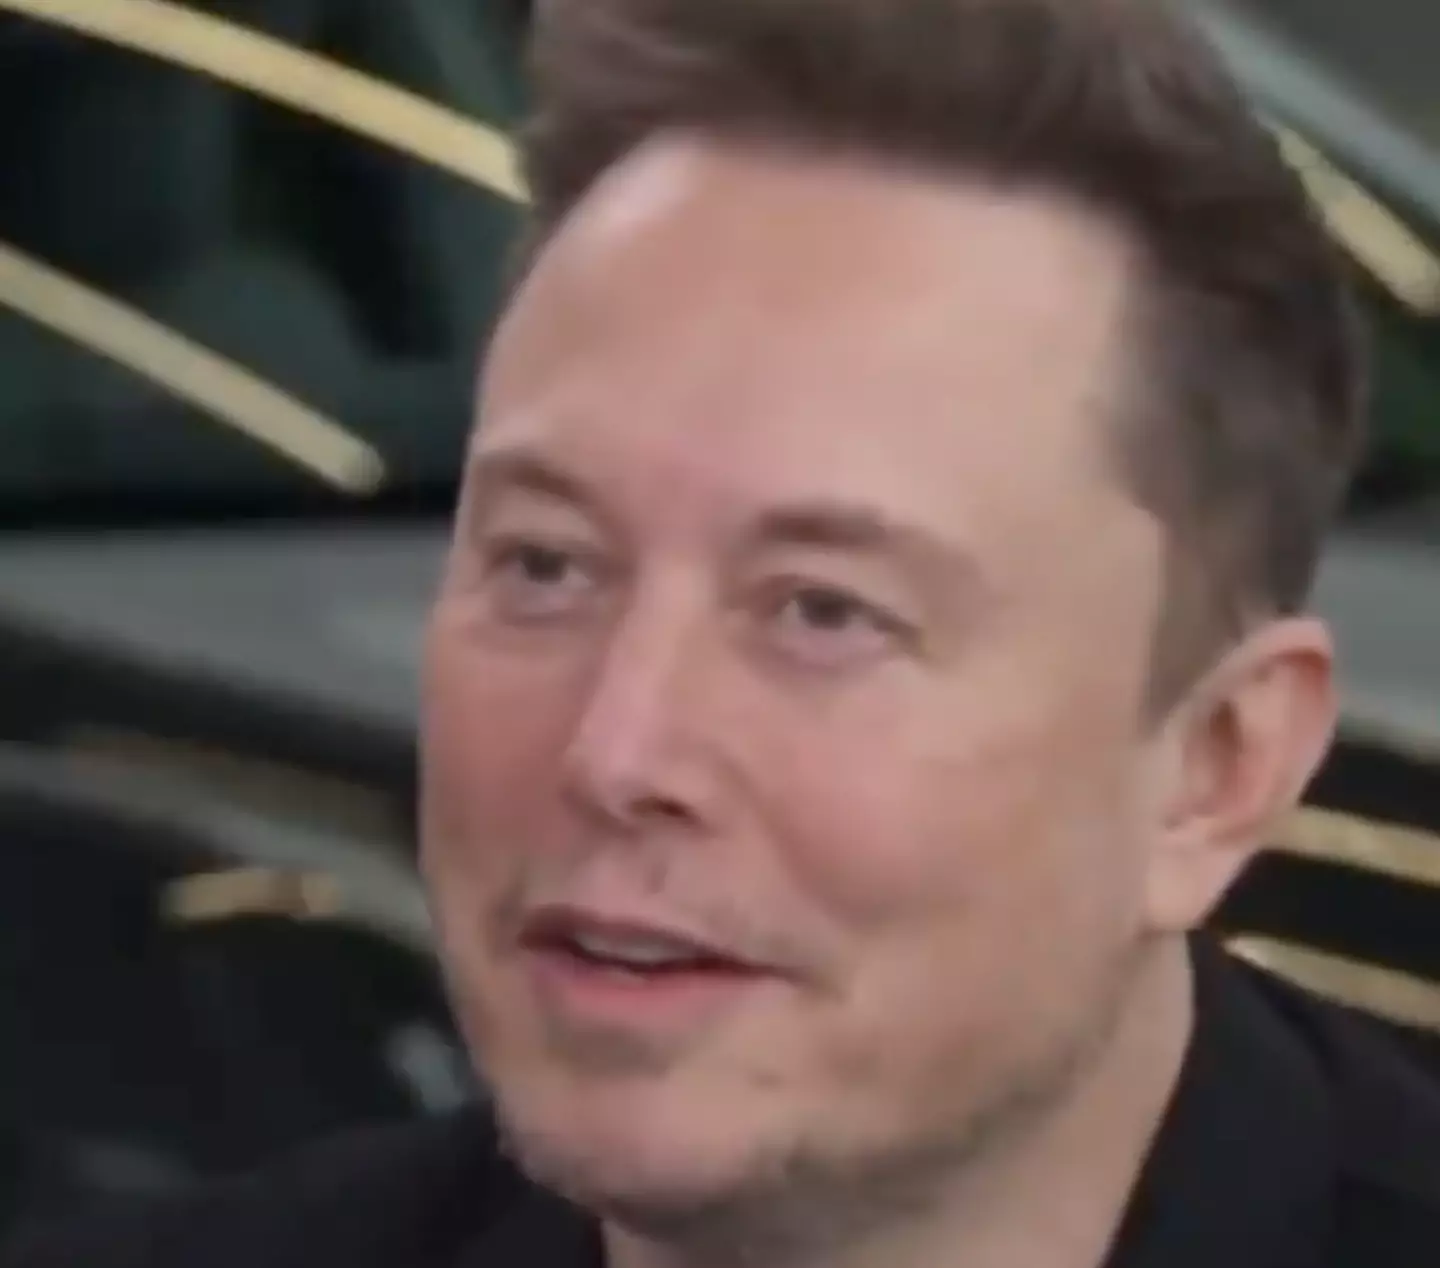 Elon Musk himself described the topic as 'private'.